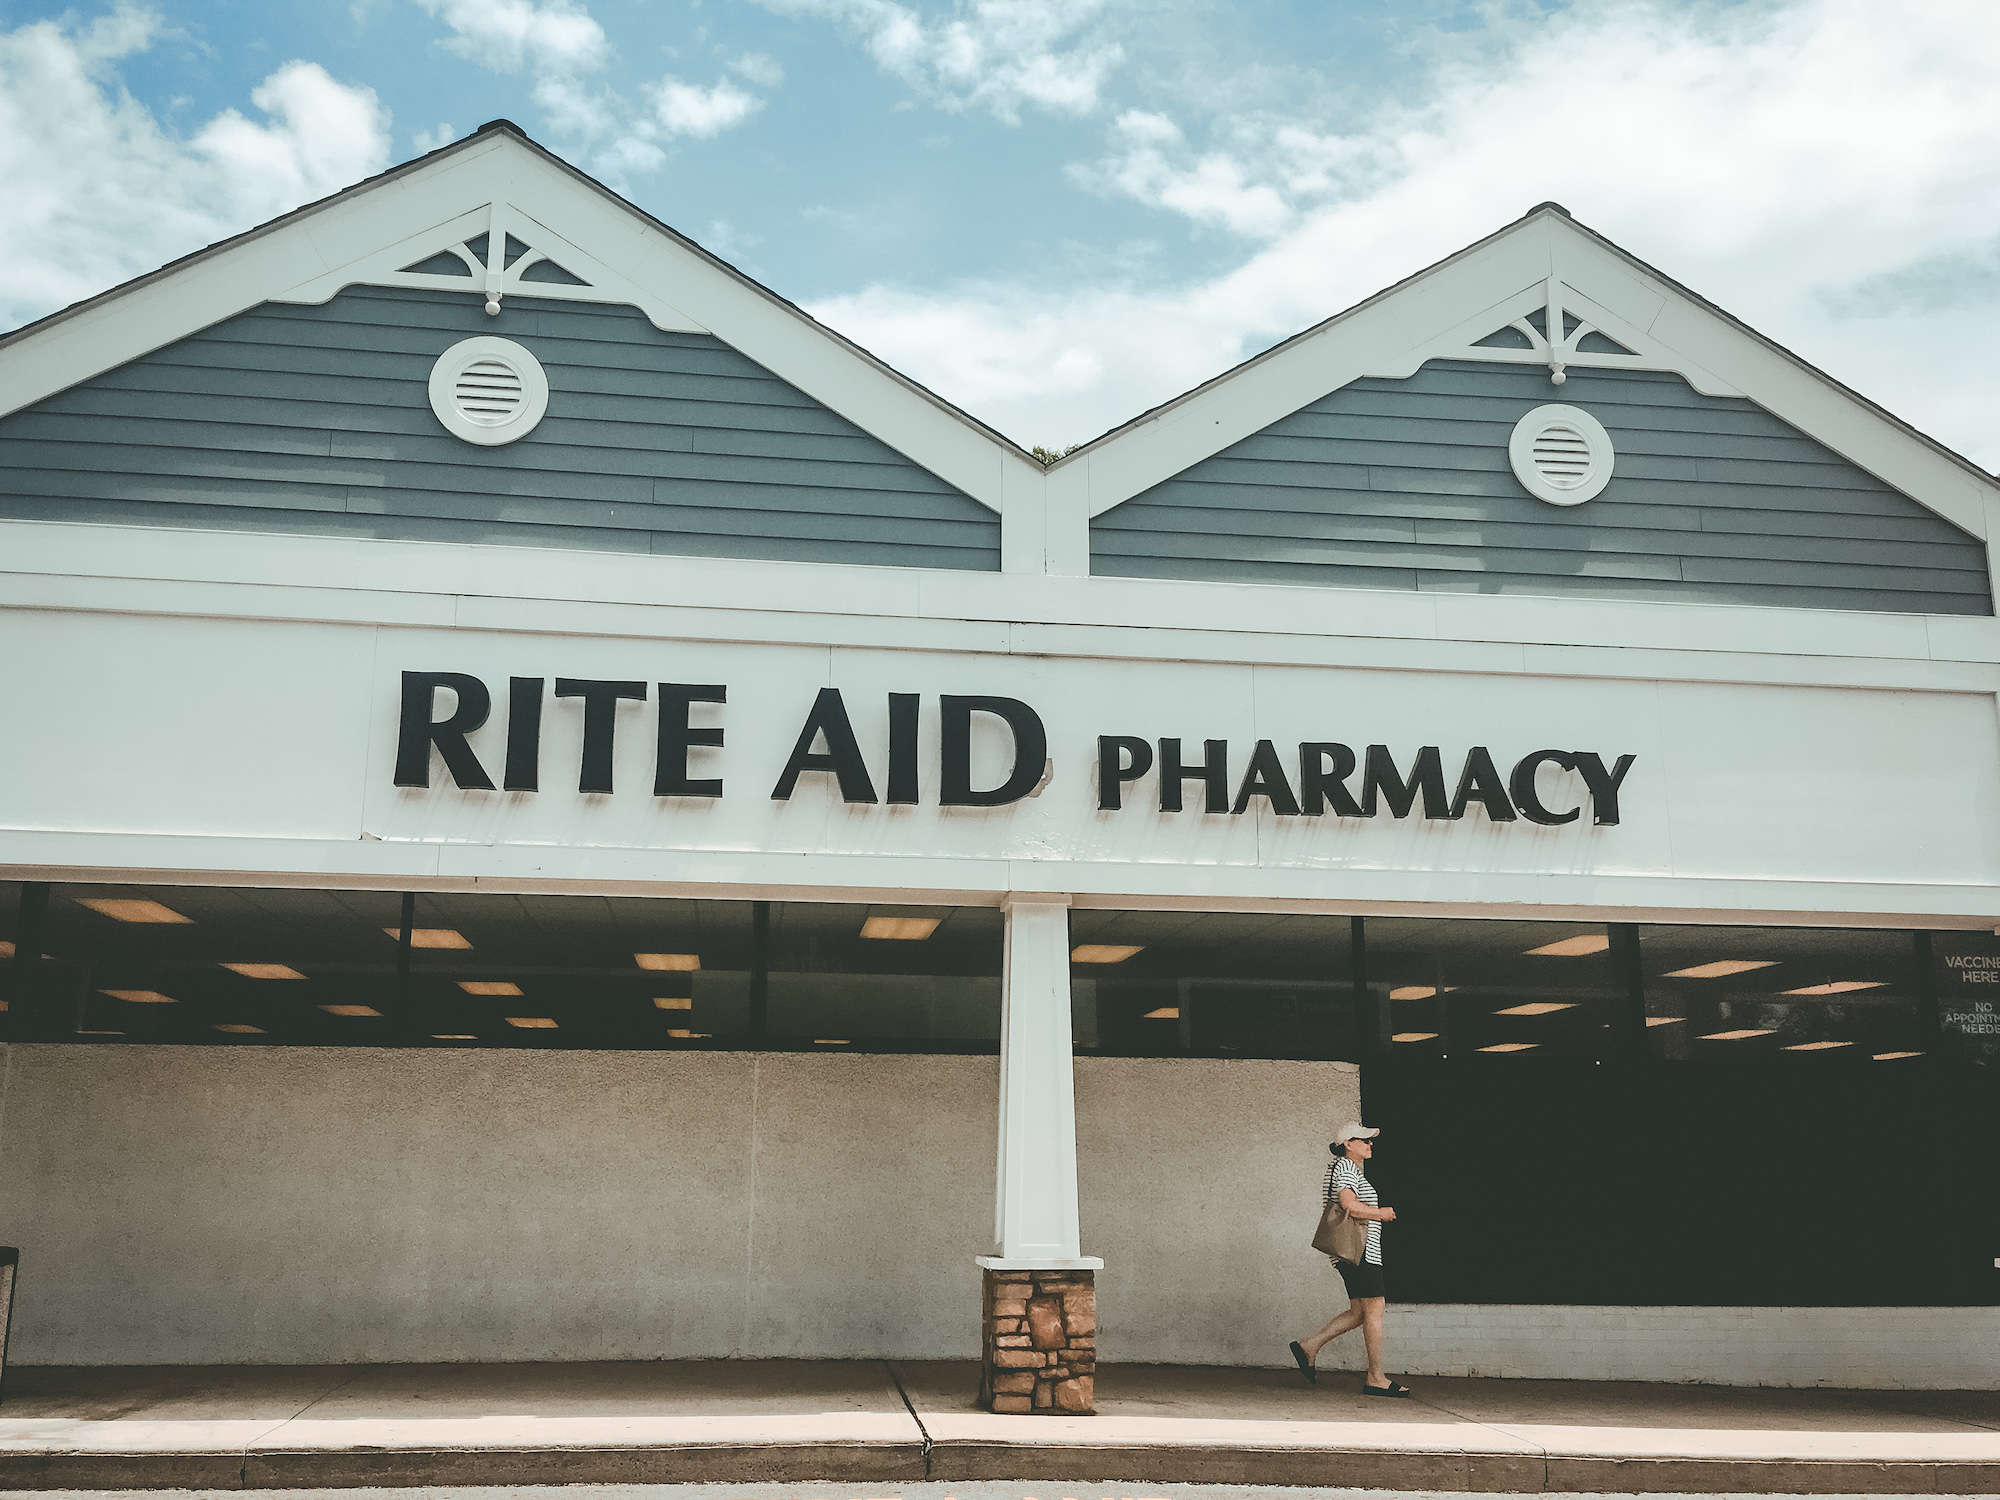 Rite Aid was the first store I went to. Business Insider India